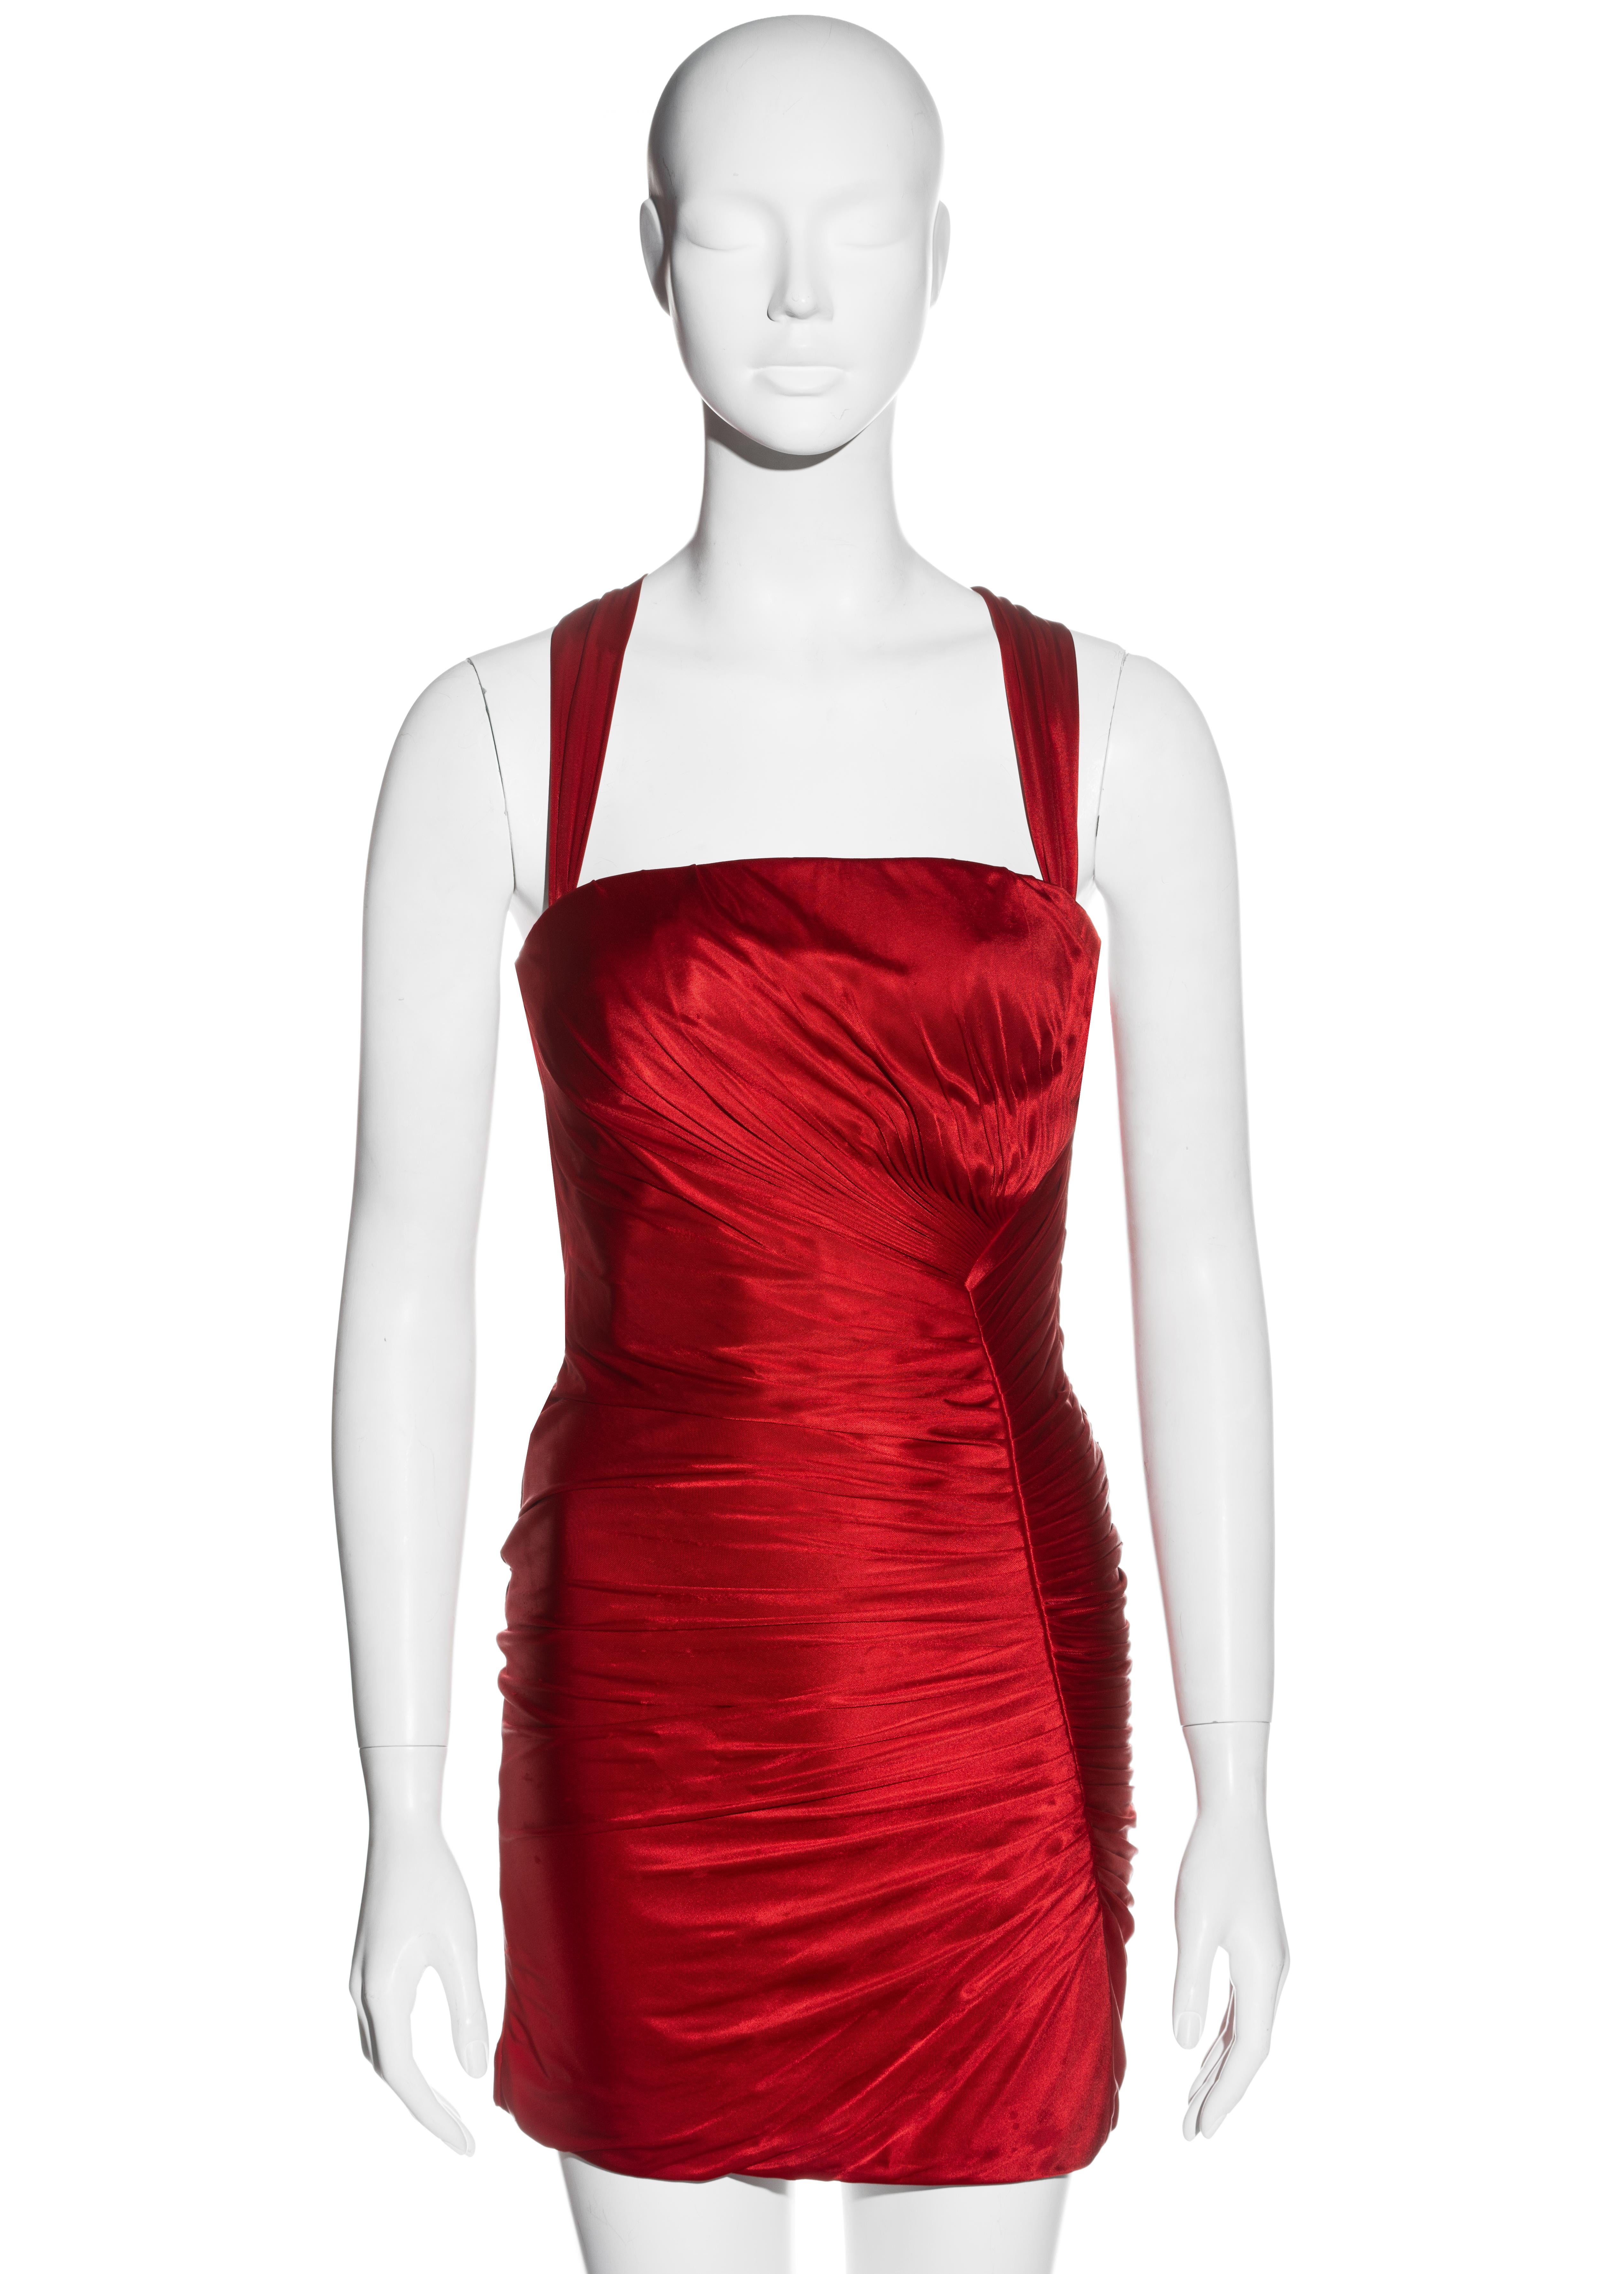 ▪ Roberto Cavalli red viscose evening mini dress
▪ Pleated seams
▪ Built-in bustier and bra 
▪ Hook fastening at shoulder straps 
▪ IT 40 - FR 36 - UK 8 - US 4
▪ c. 2000s